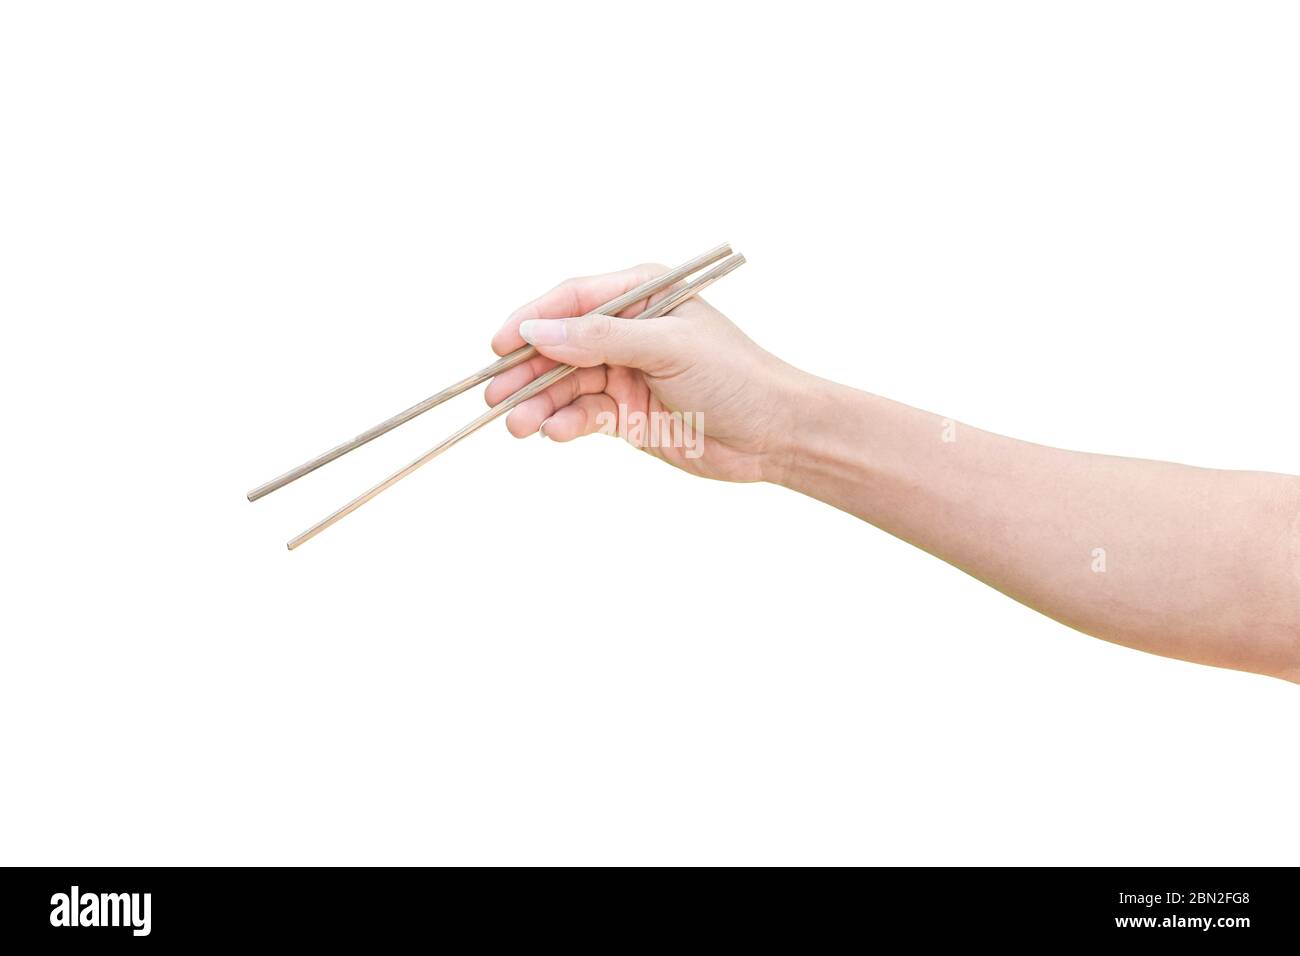 hand holding wooden chopsticks isolated on white background with clipping path. Stock Photo